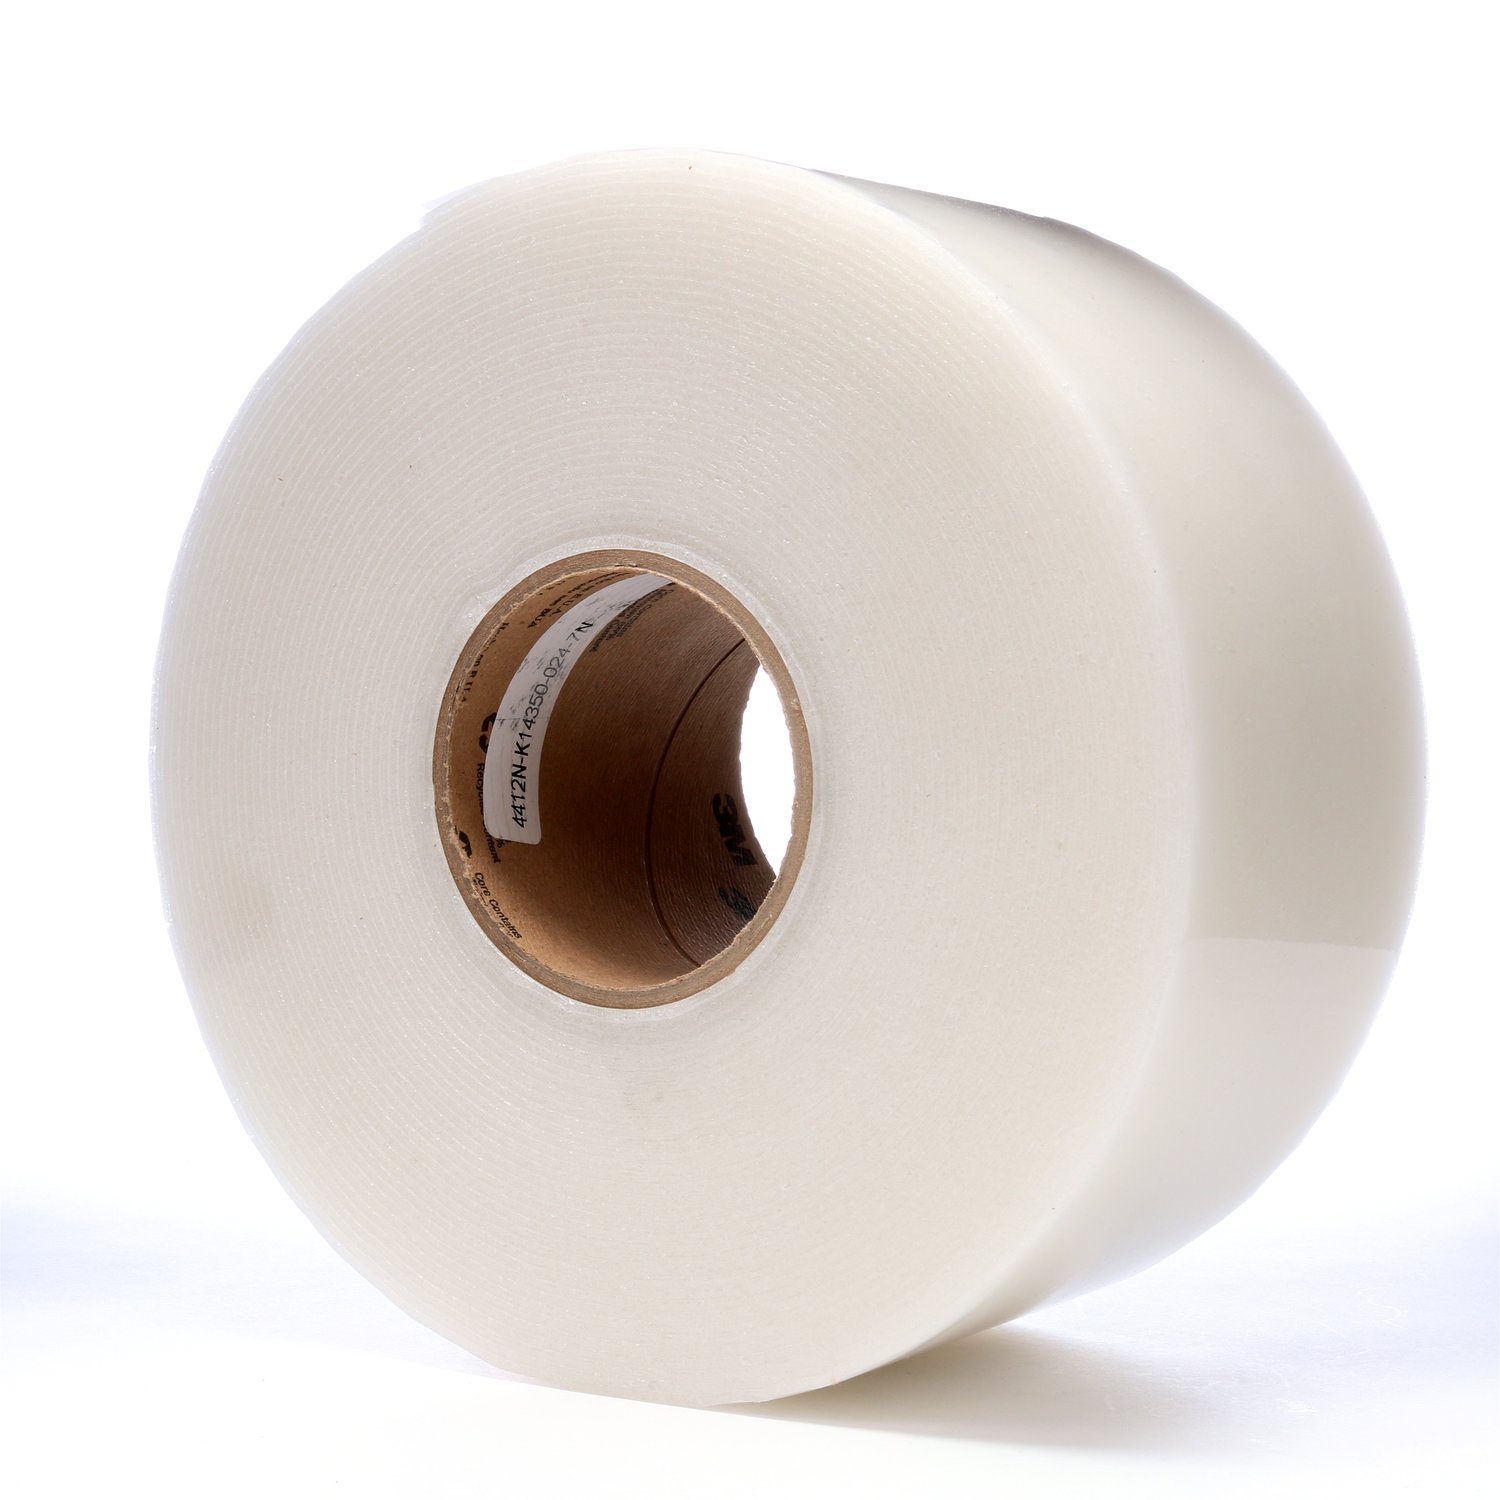 7000049564 - 3M Extreme Sealing Tape 4412N, Translucent, 4 in x 18 yd, 80 mil, 2
rolls per case